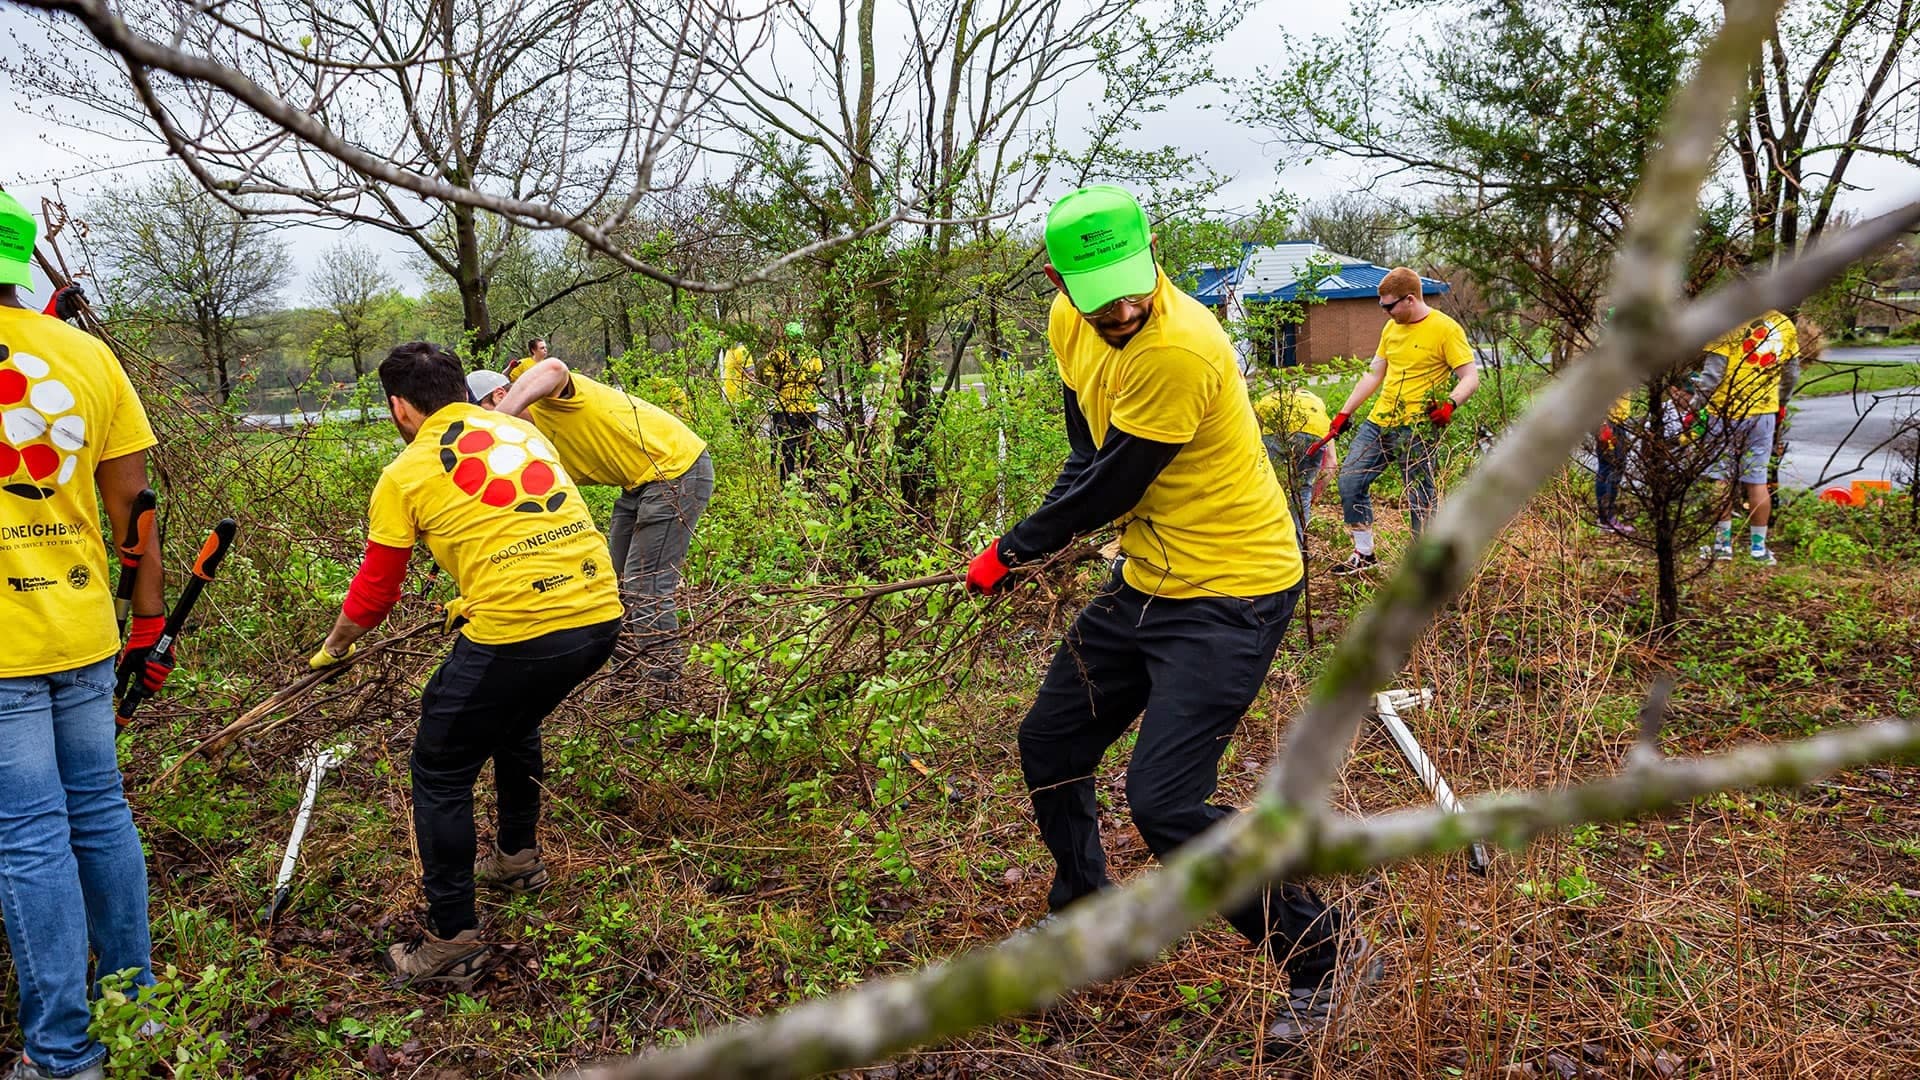 UMD students, faculty and staff volunteer at Good Neighbor Day 2019, removing invasive plant species near Lake Artemesia.